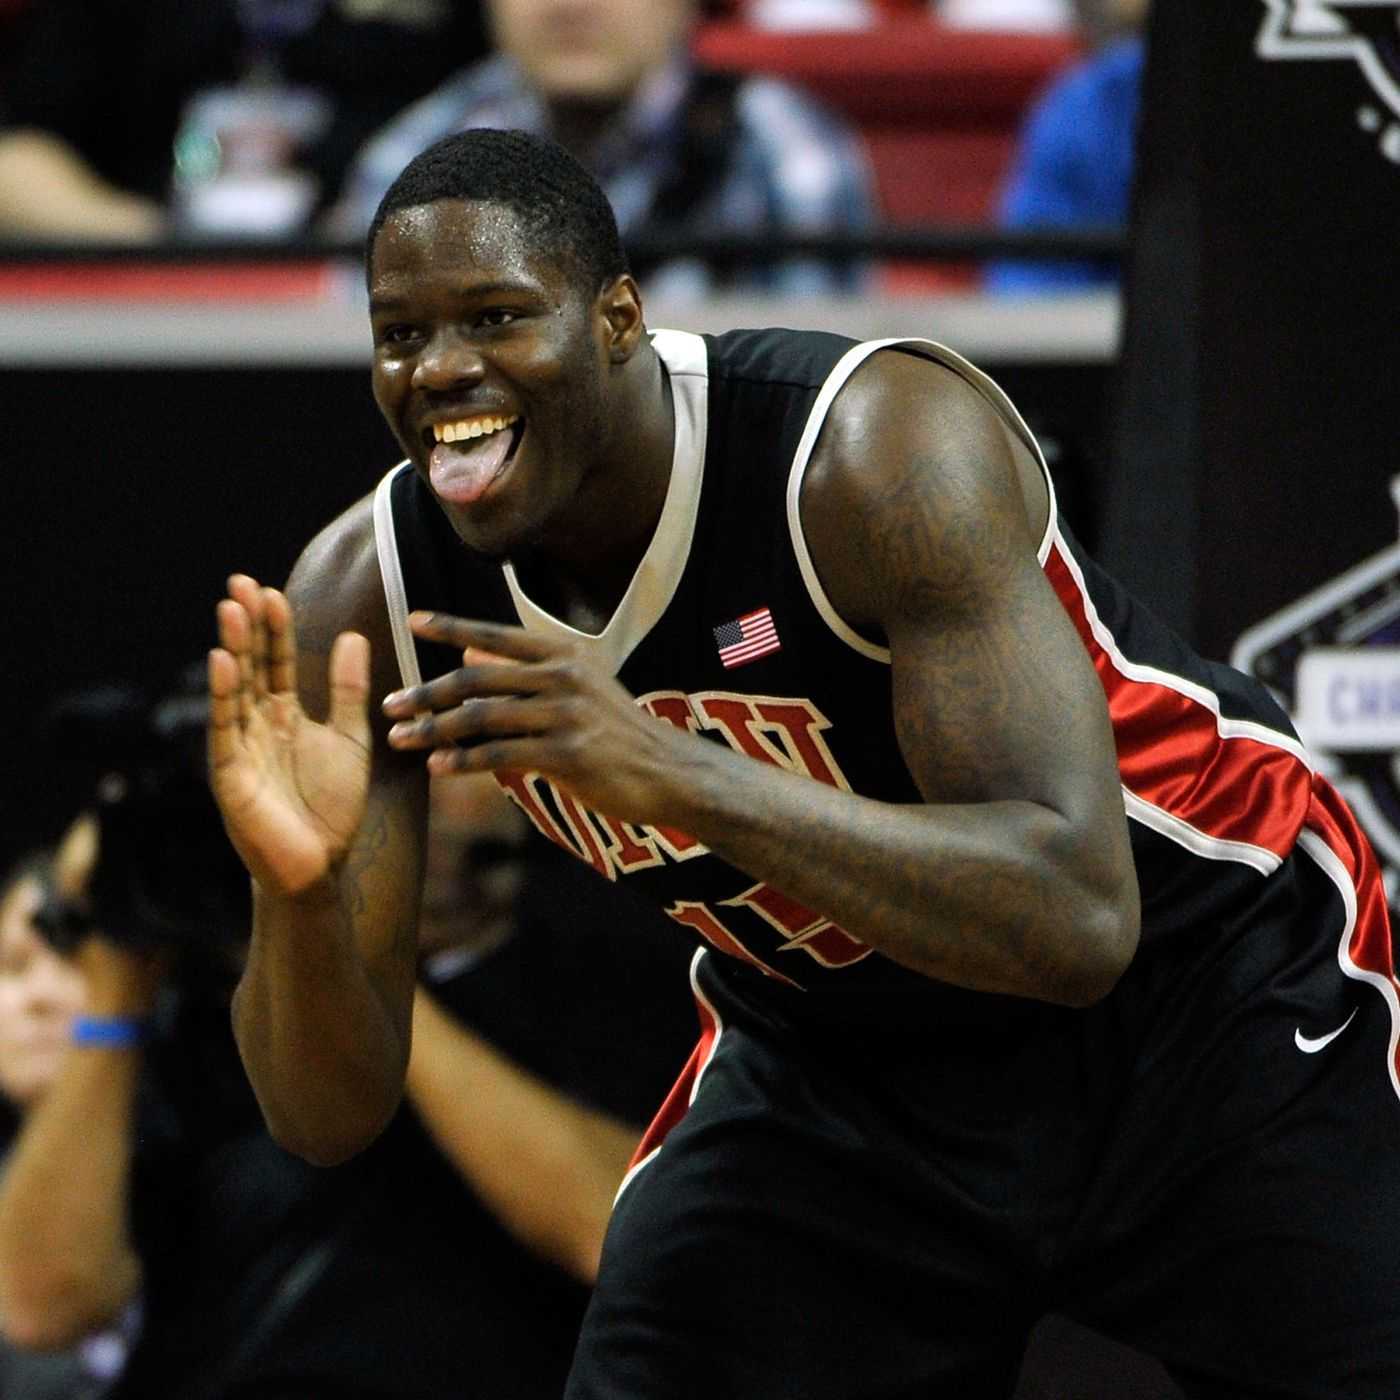 Nba Draft 2013: Anthony Bennett Scouting Report – Sbnation With Basketball Player Scouting Report Template